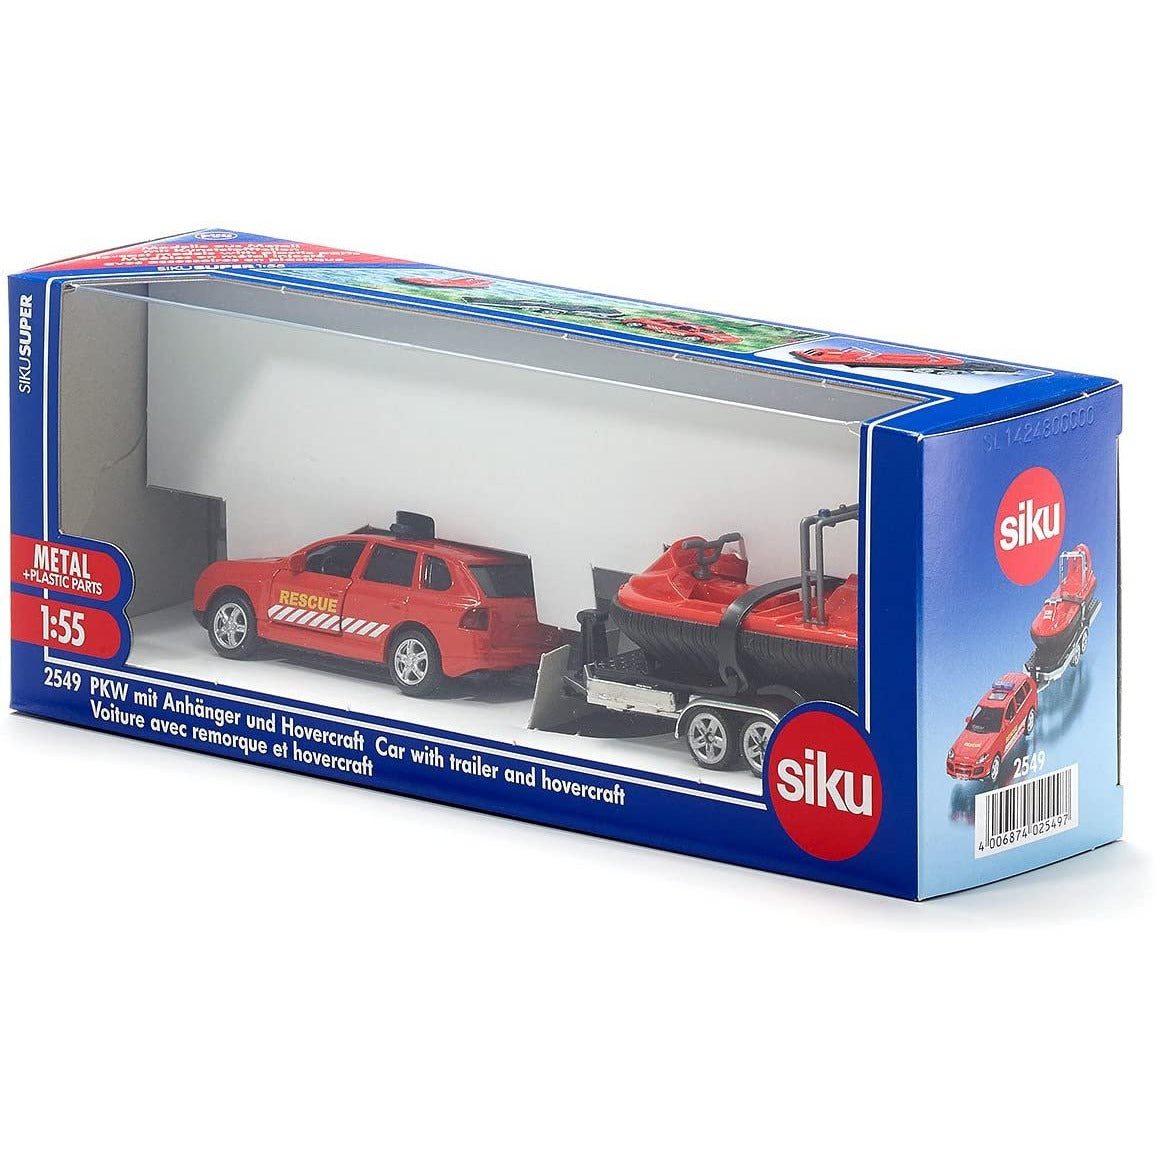 Pick-Up Truck with Tipping Trailer 1:55 #3543 by Siku